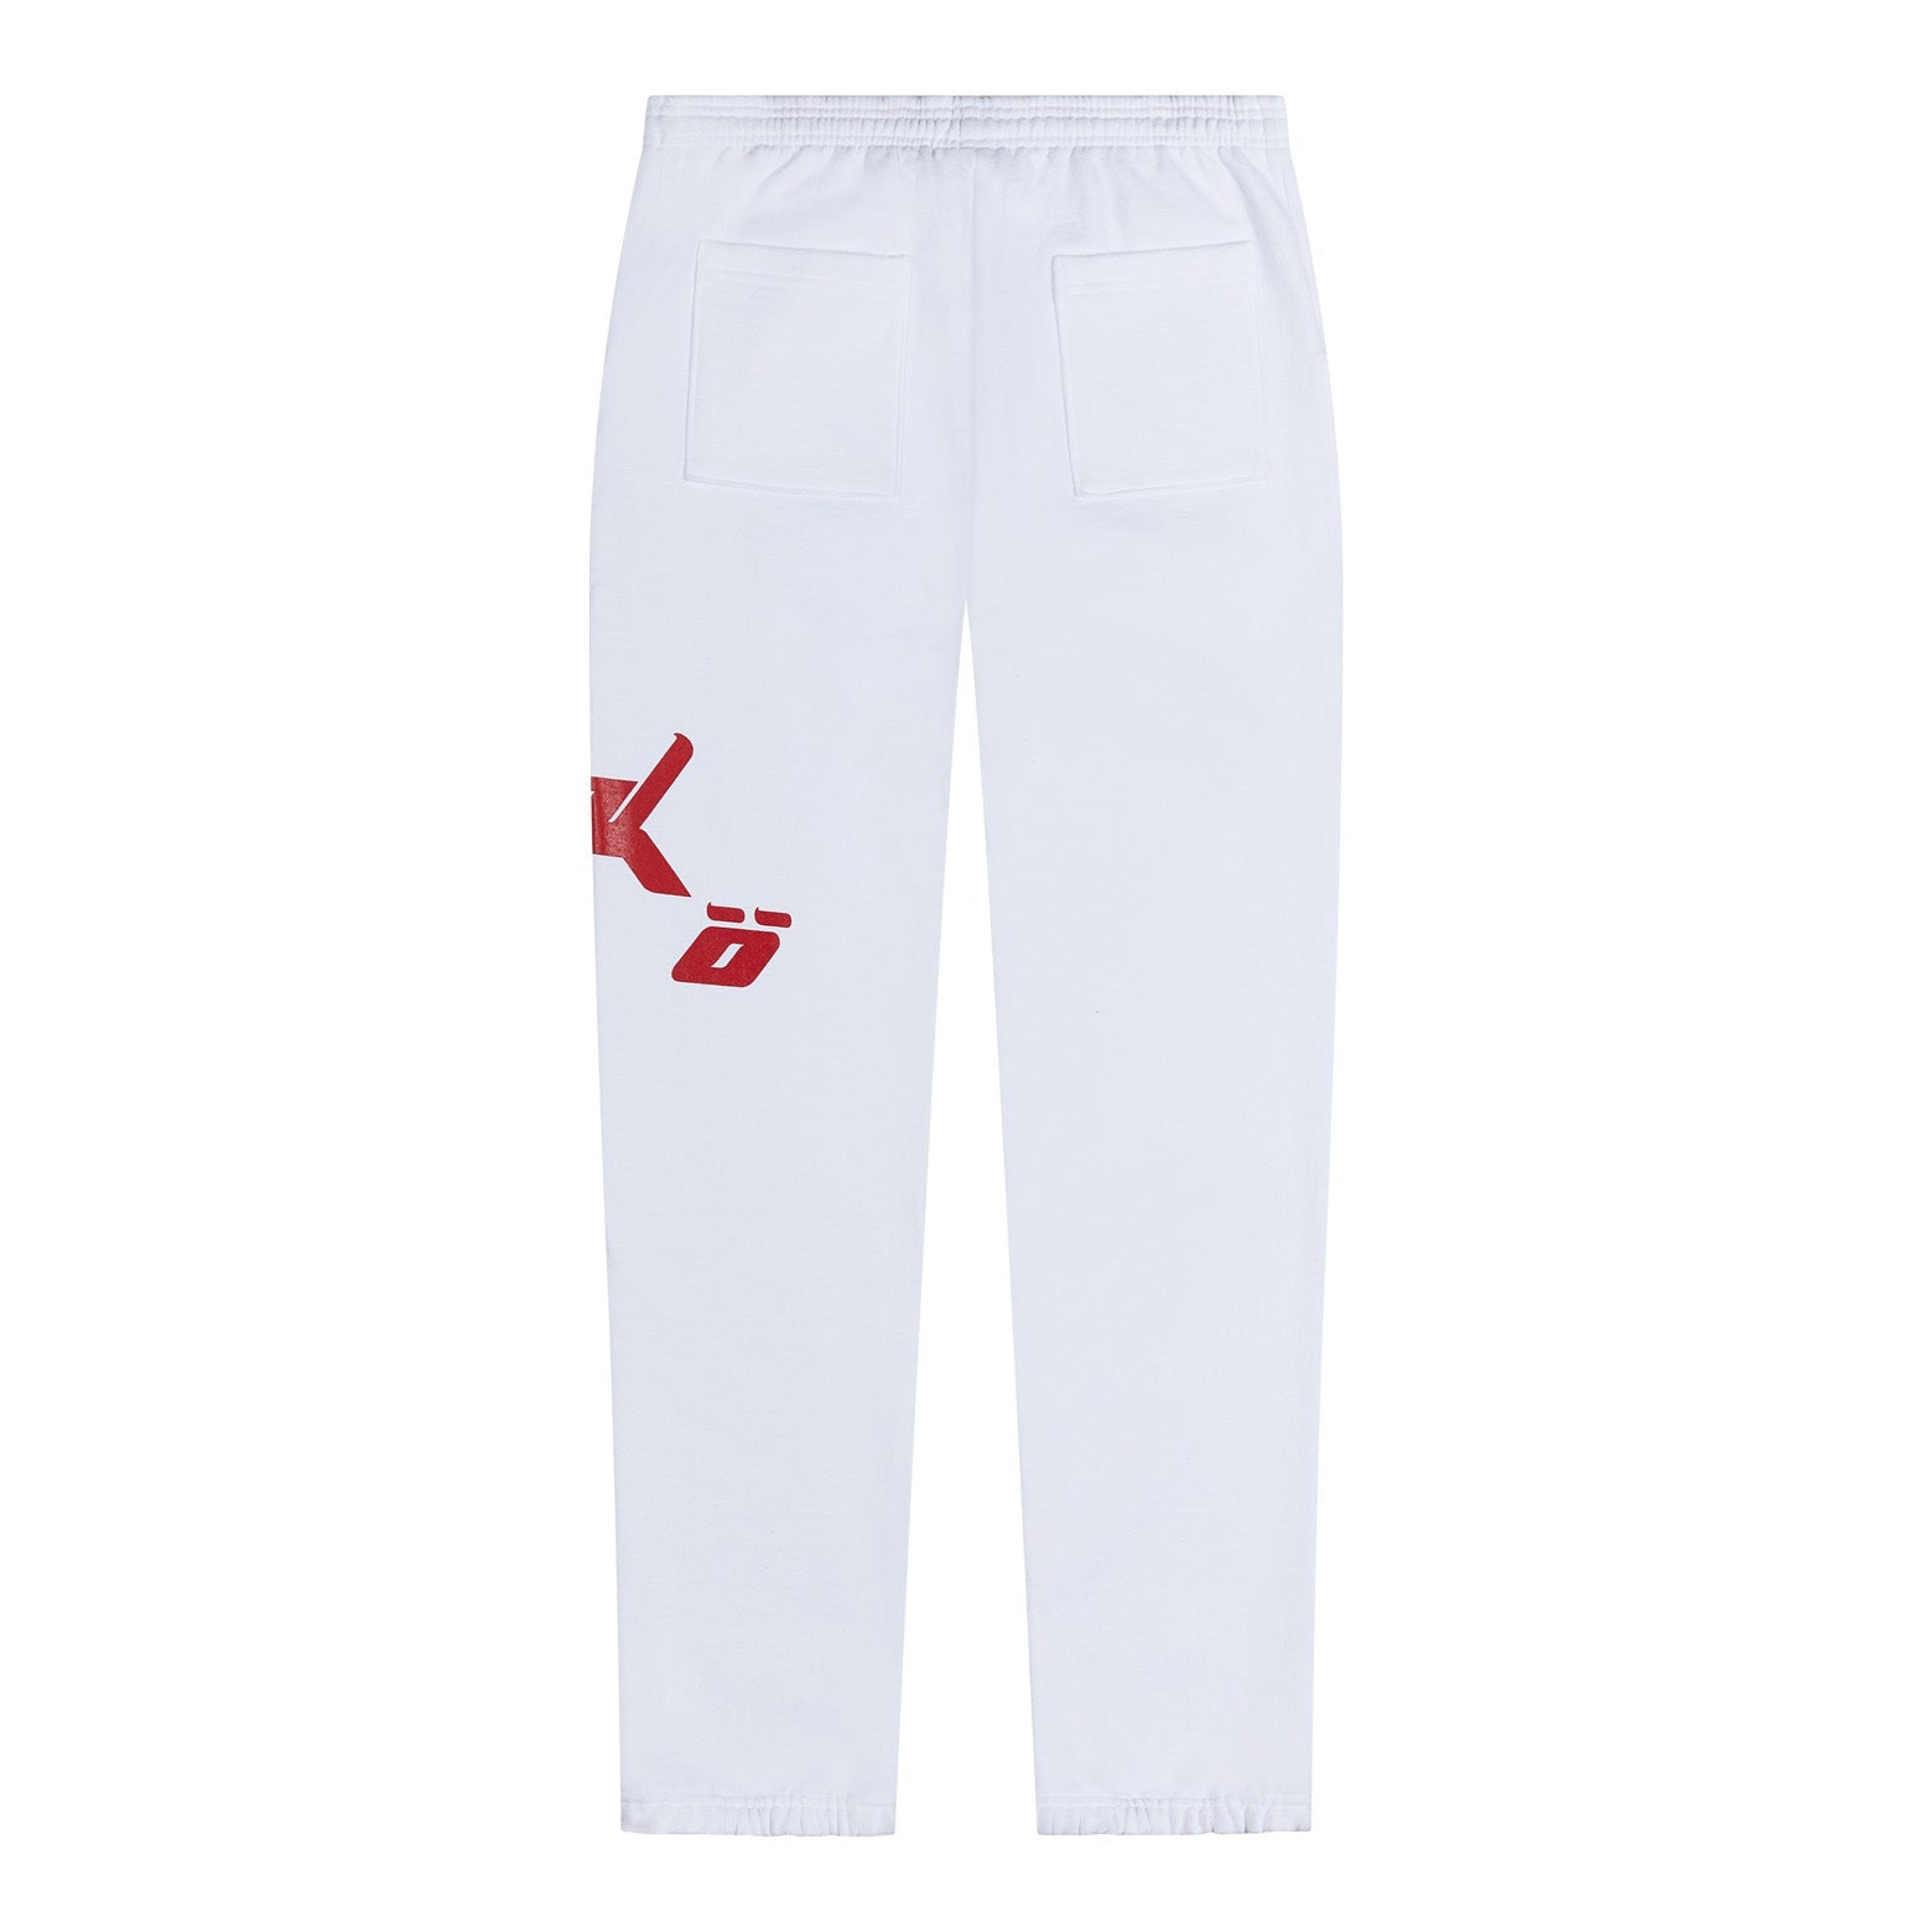 Alternate View 2 of Born From Pain Sweatpants - White